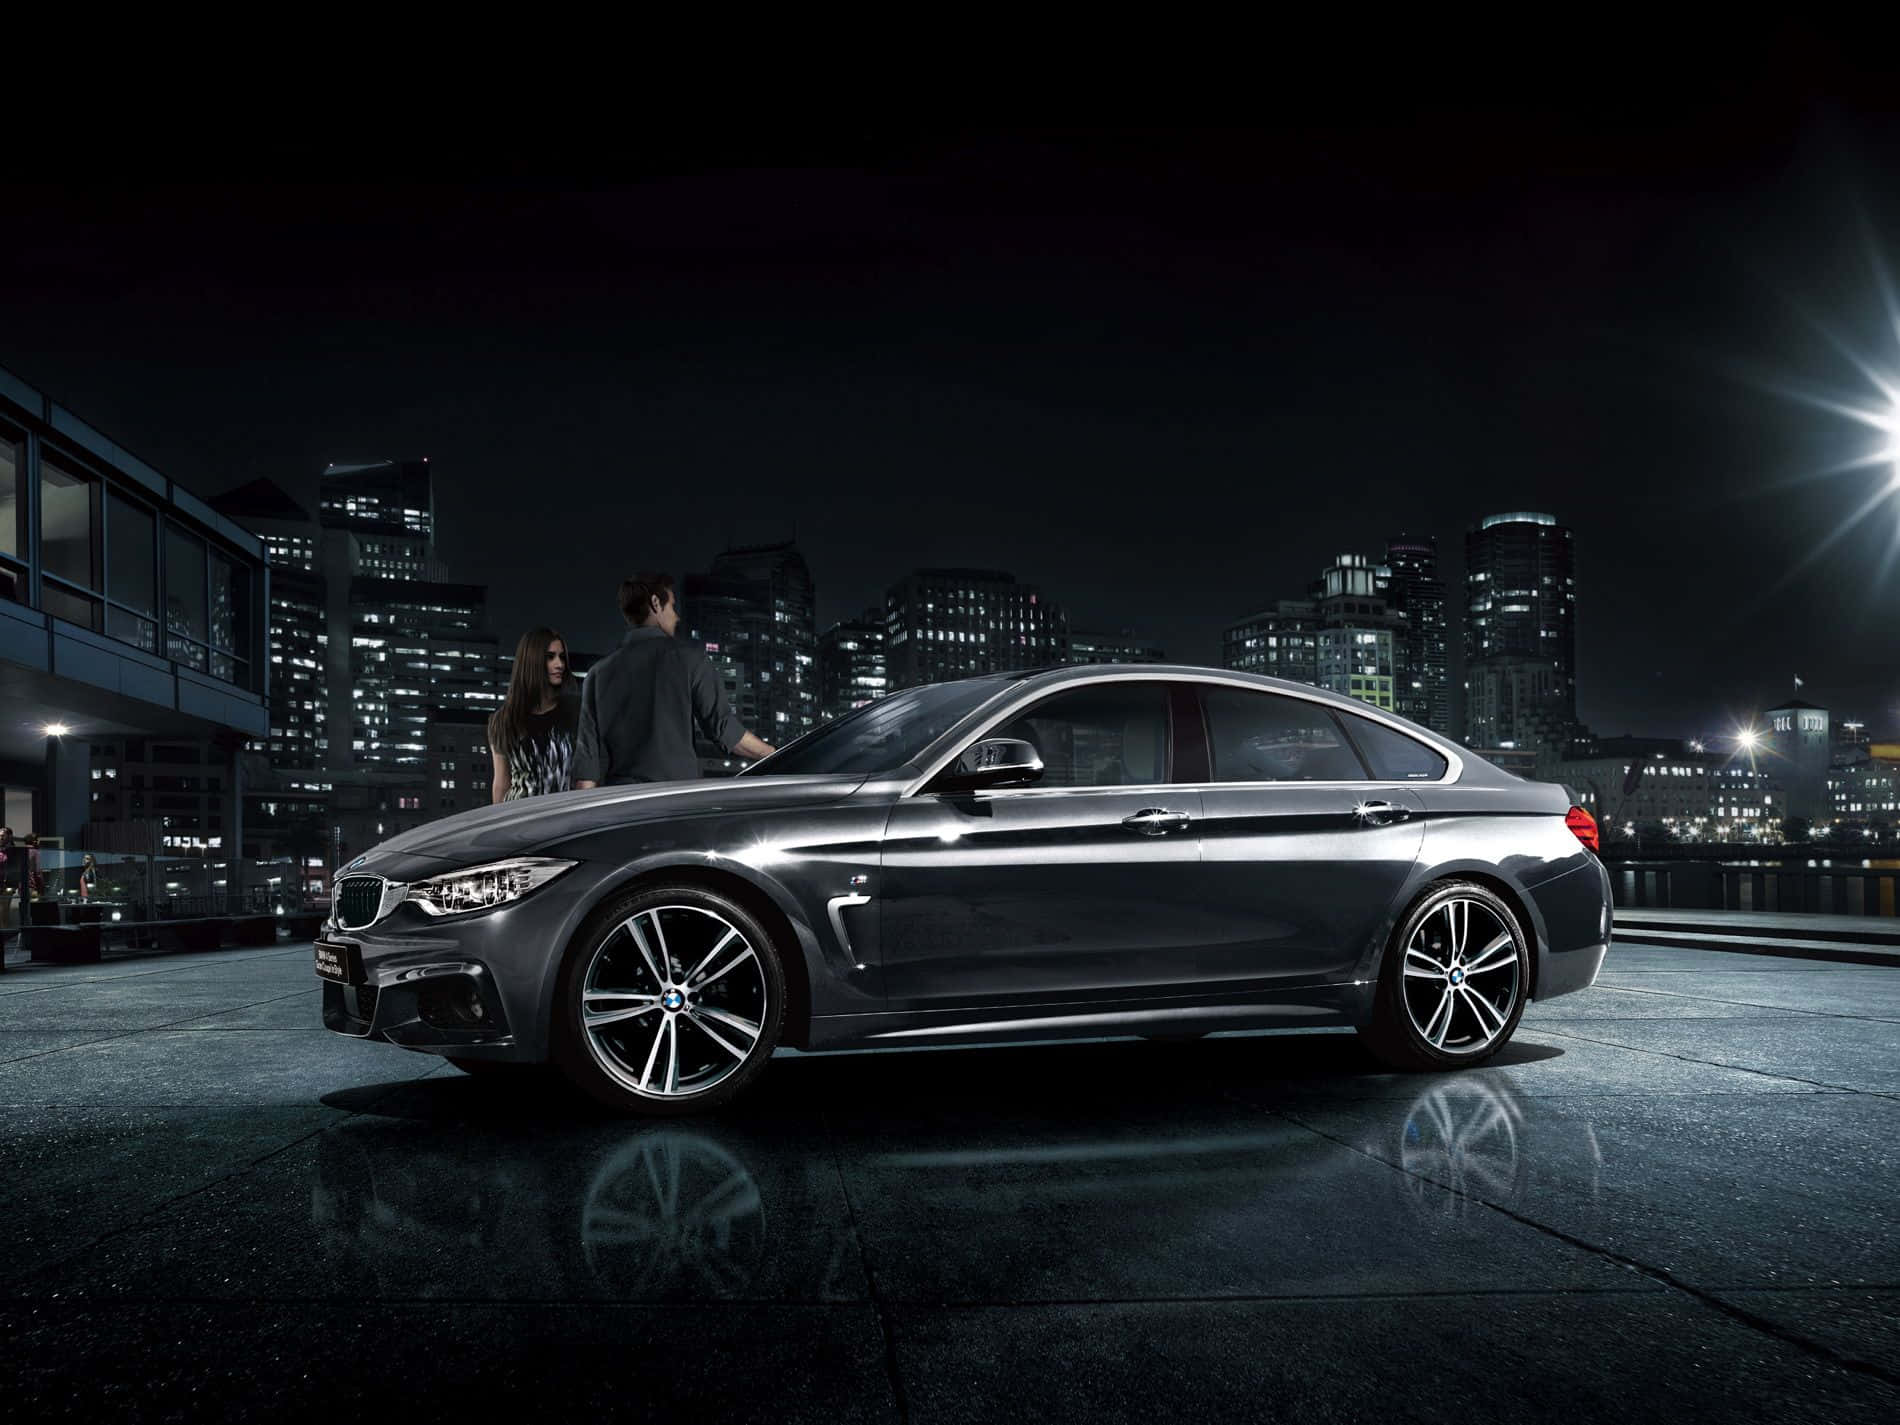 A stylish BMW 4 Series Coupe on the road Wallpaper